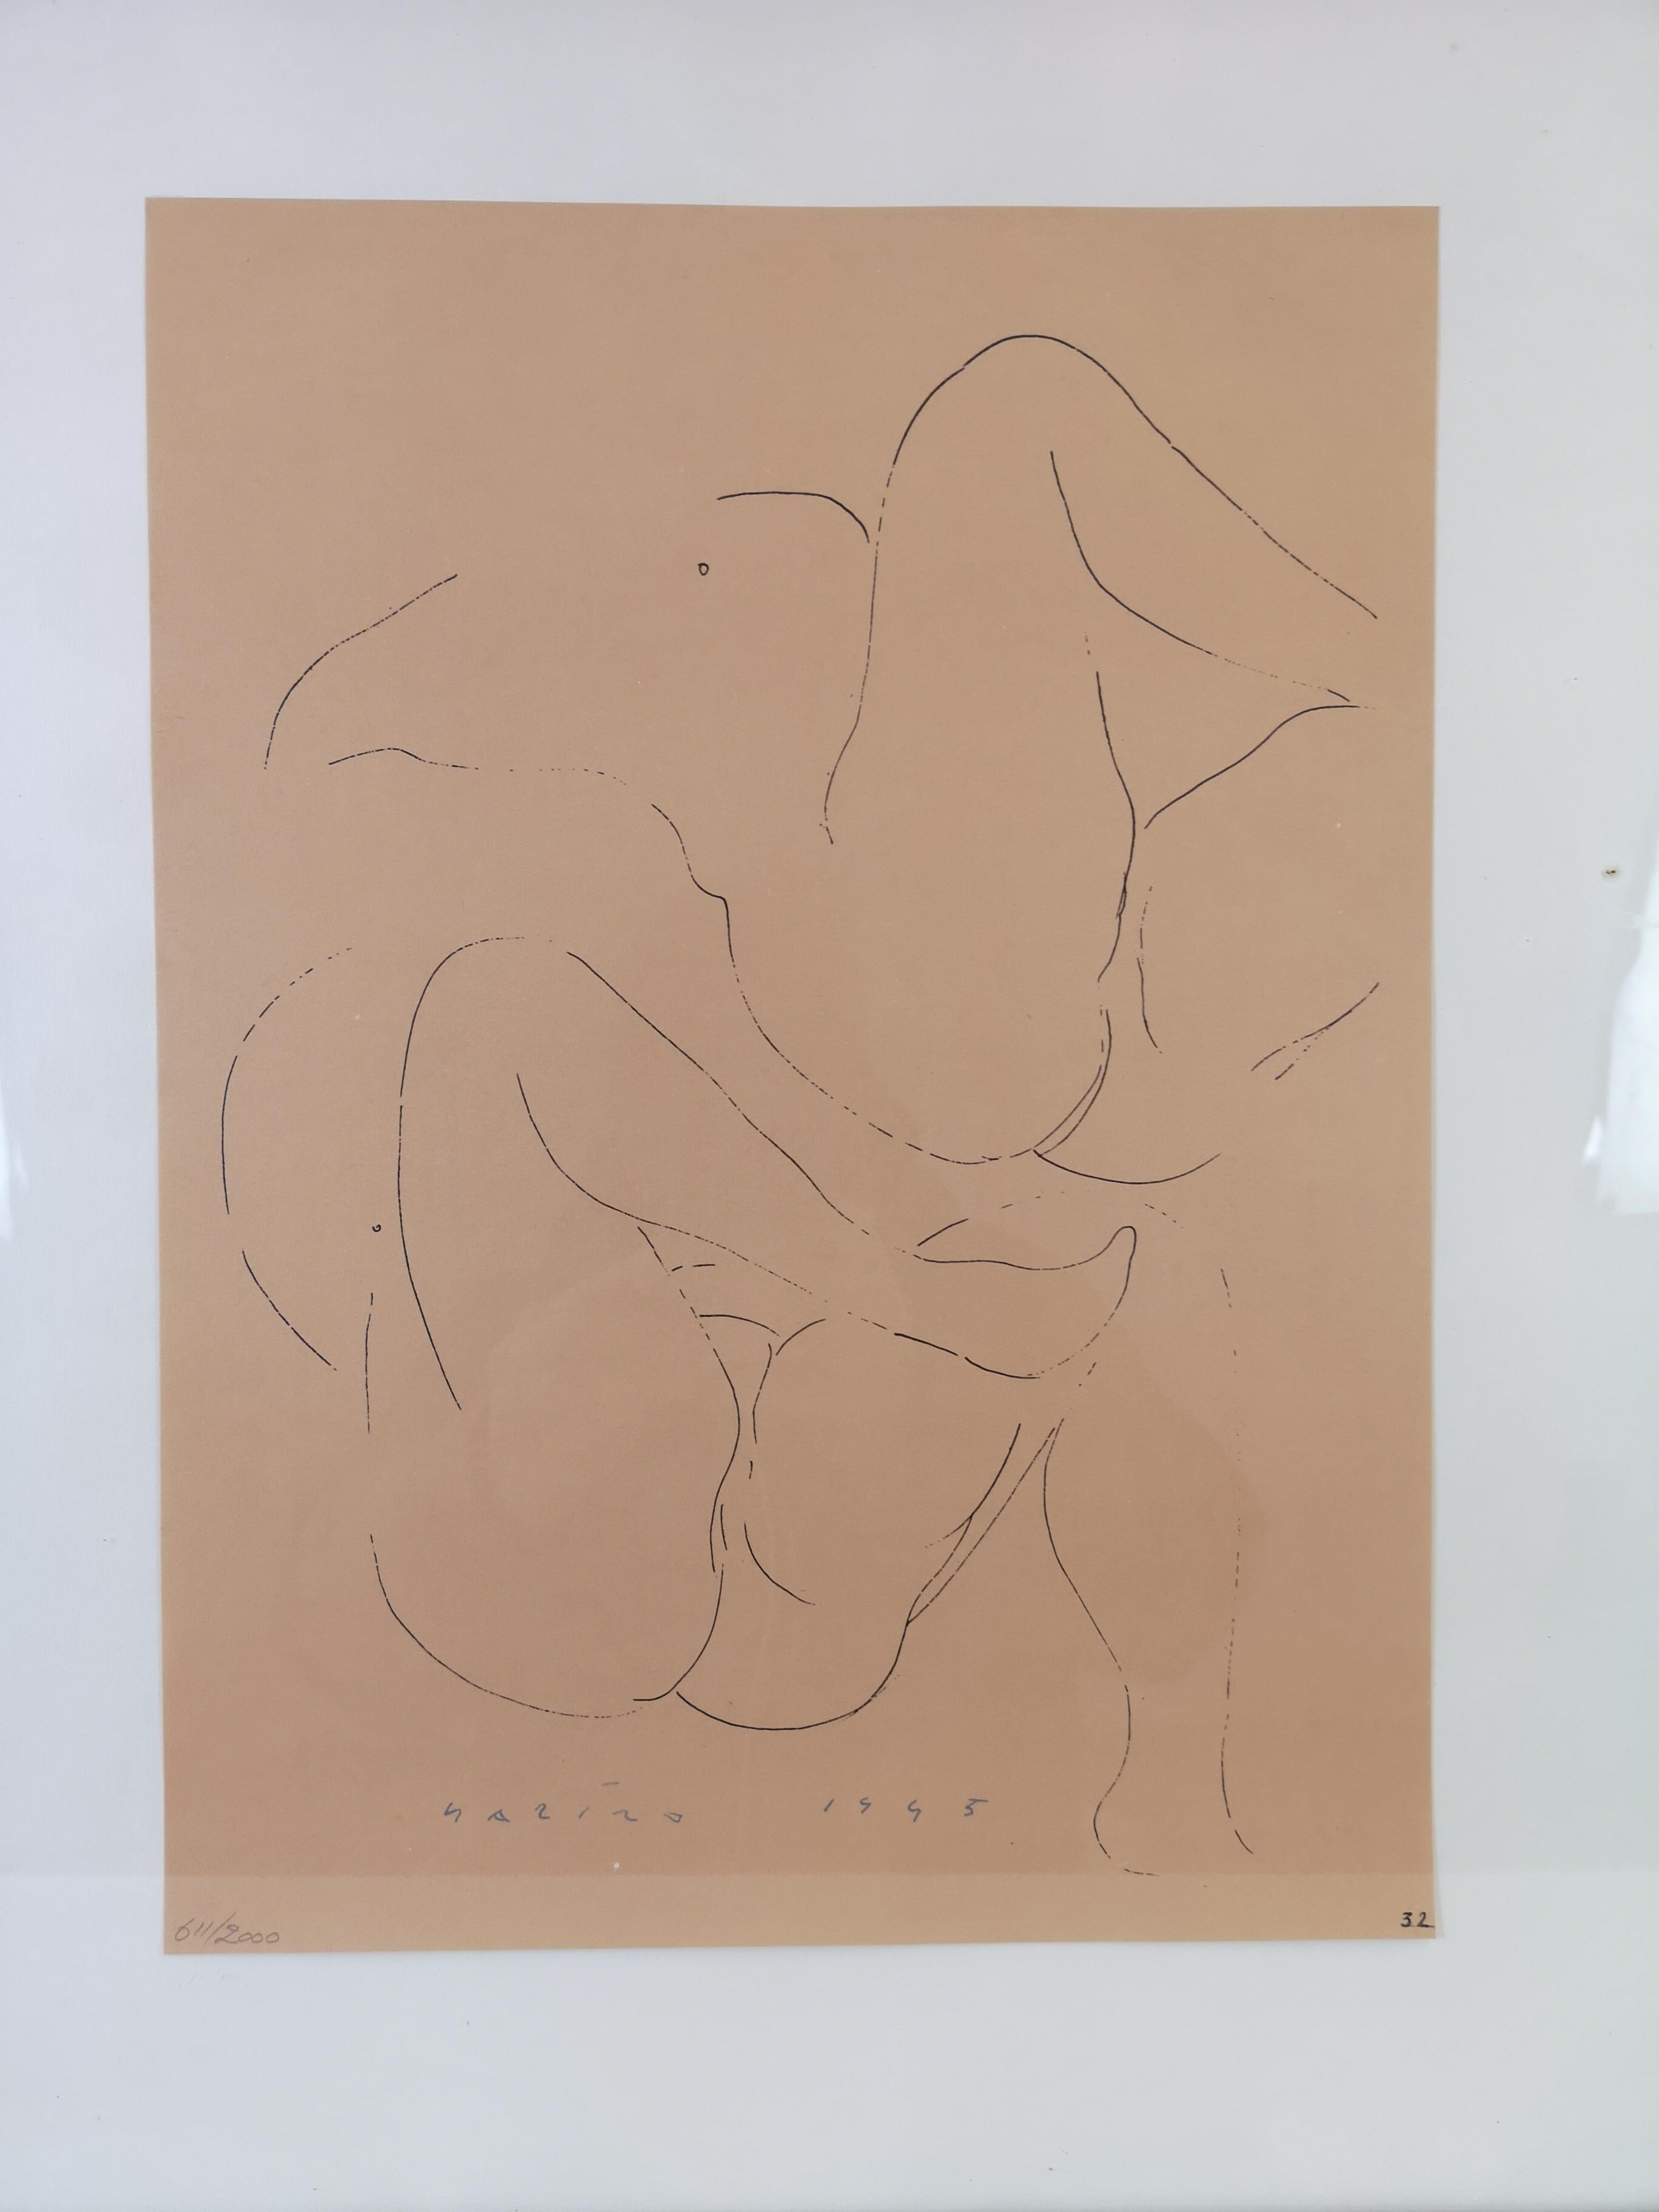 Lithograph after a drawing by Marino Marini, from the Marino Marini portfolio by Werner Haftmann titled 